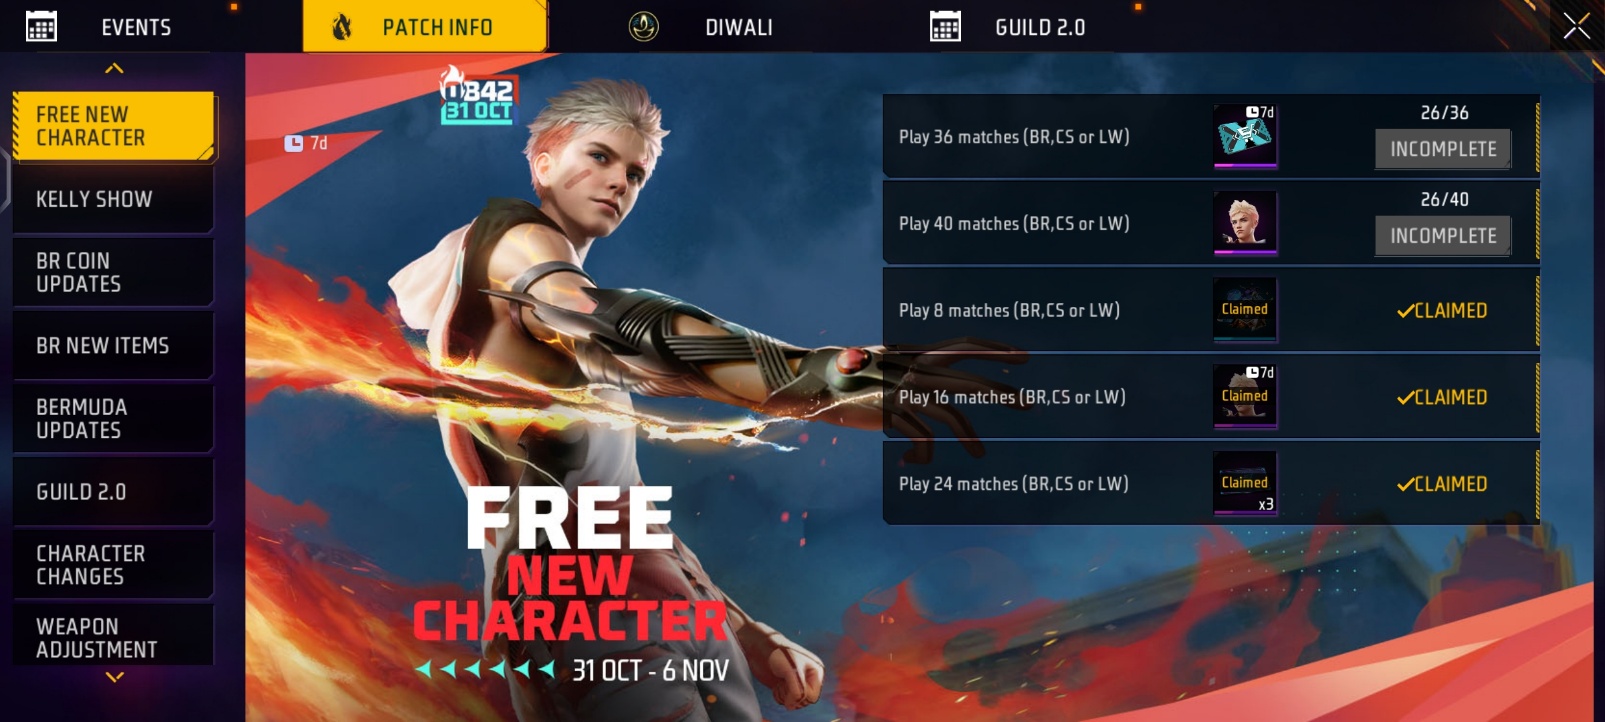 How To Get The New Character In Free Fire: Ignis